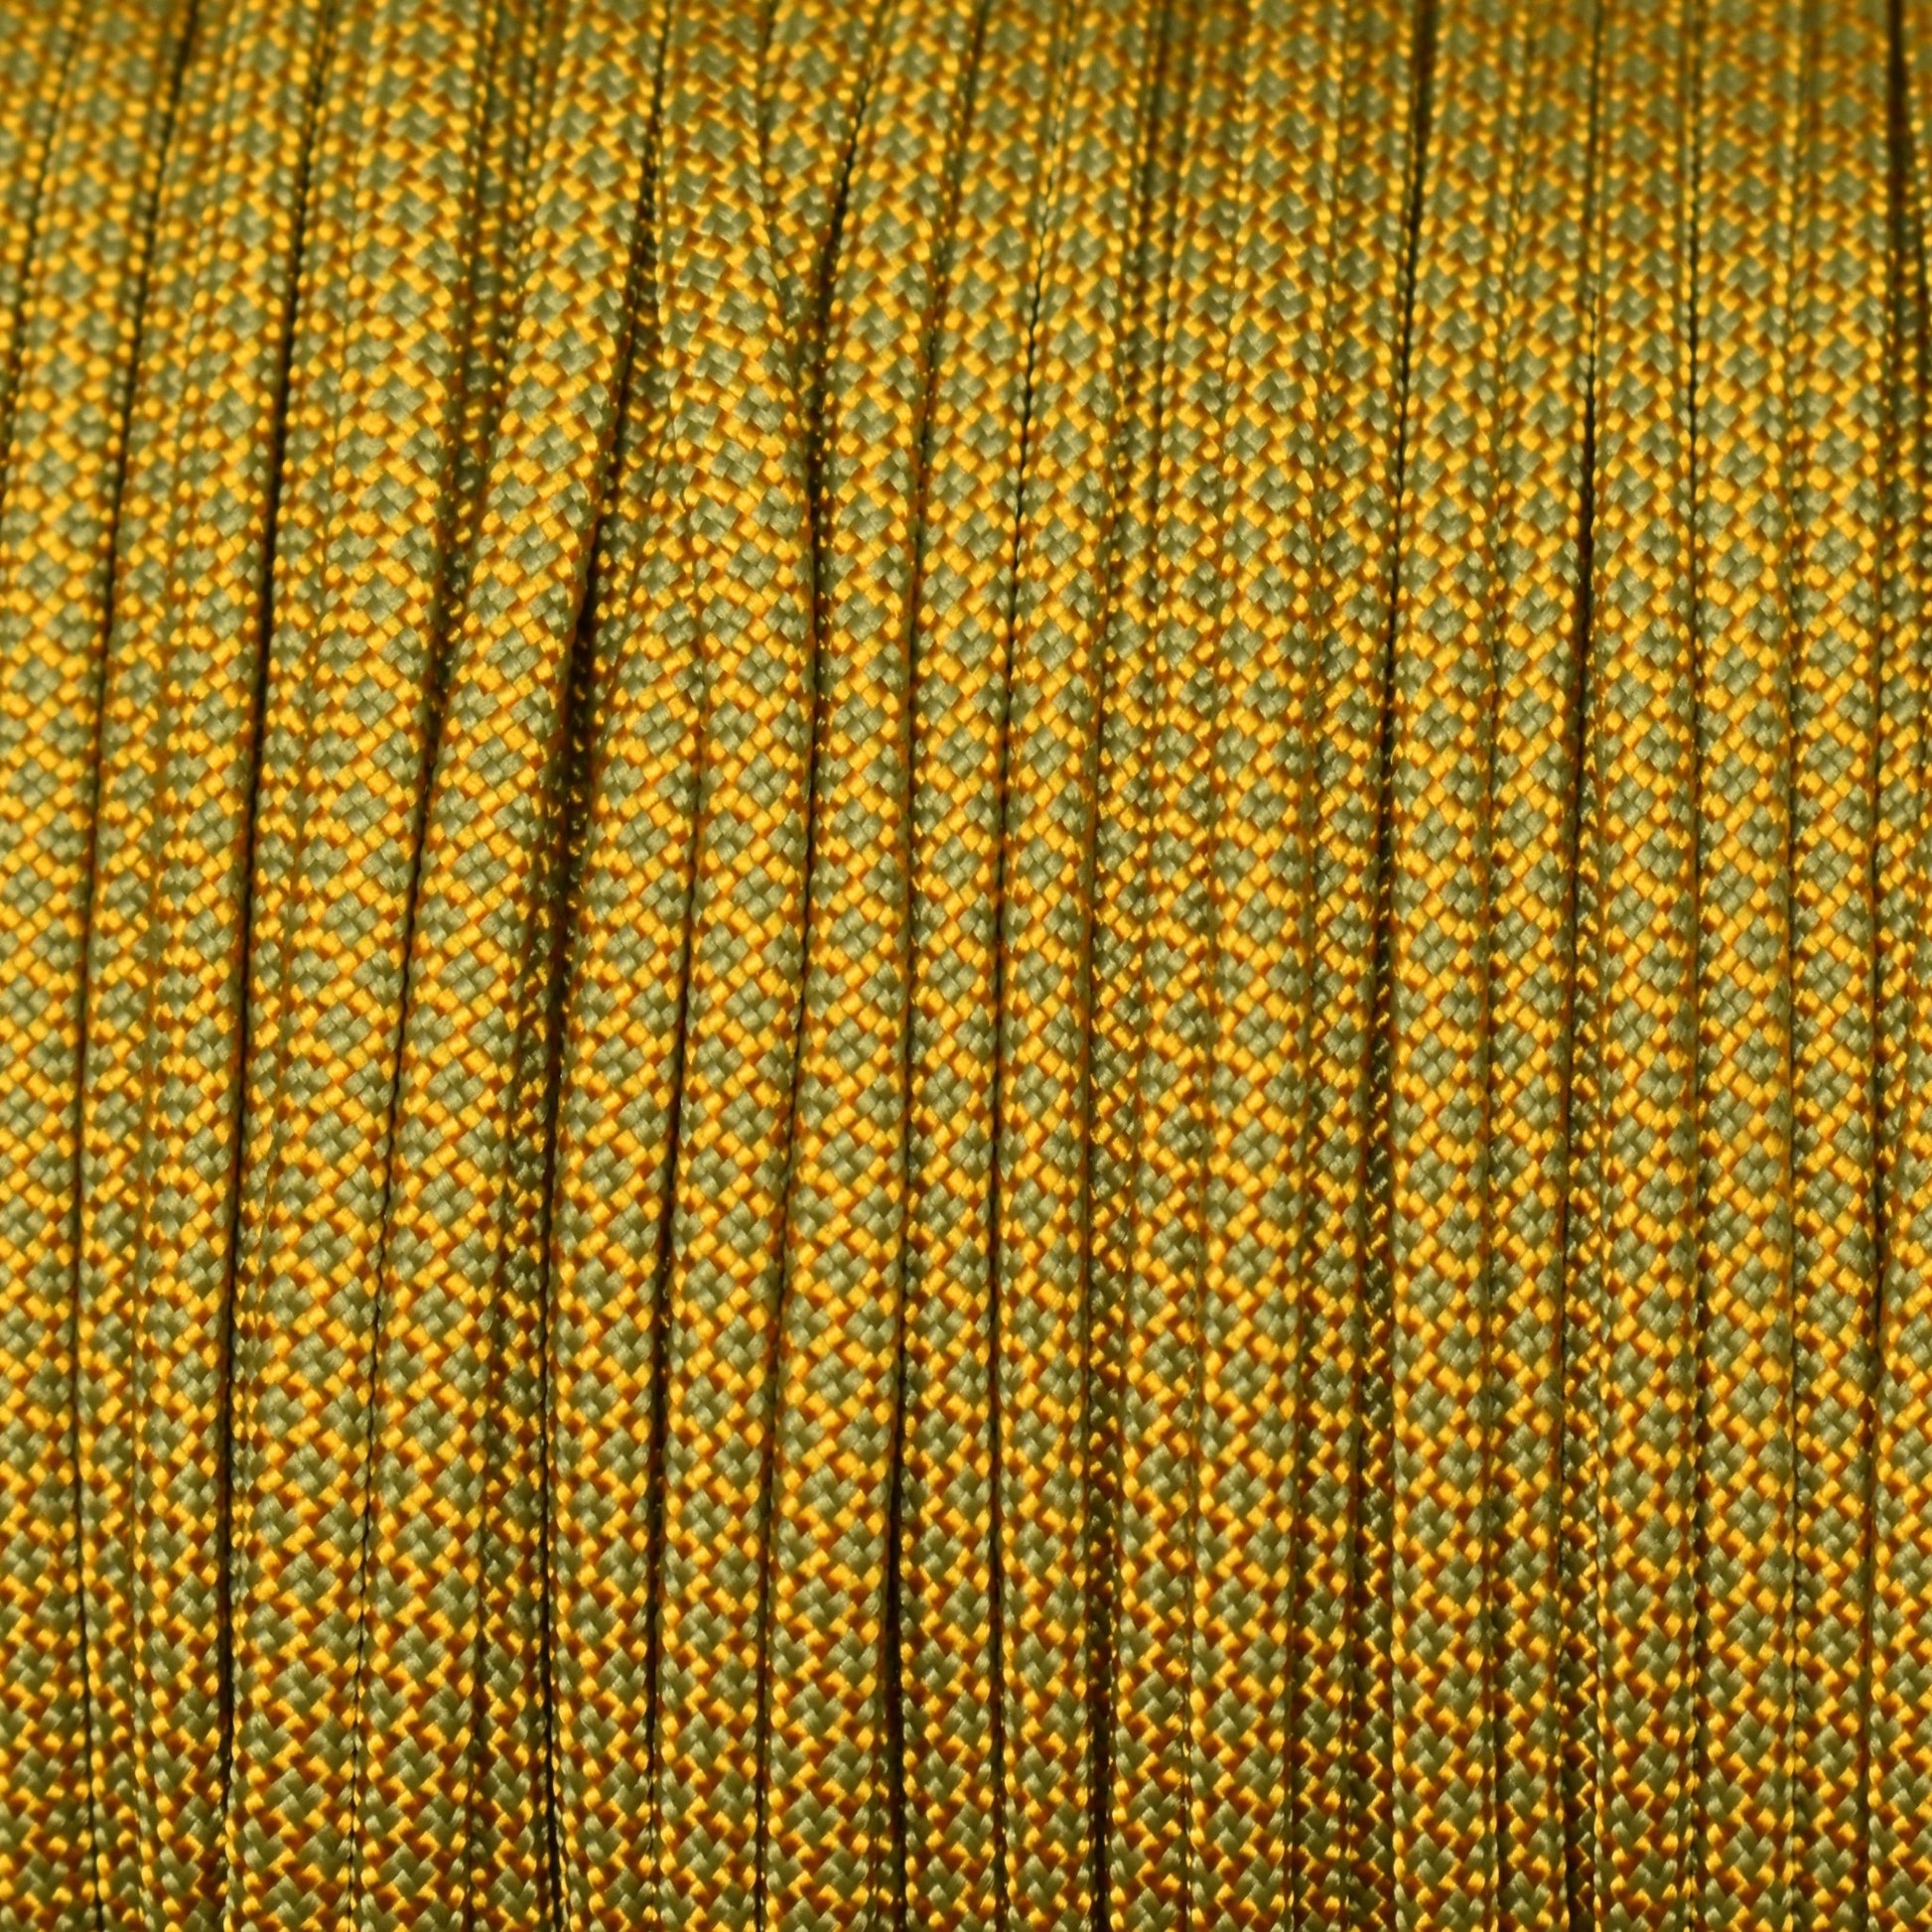 550 Paracord Goldenrod with Moss Diamonds Made in the USA Nylon/Nylon (1000 FT.) - Paracord Galaxy